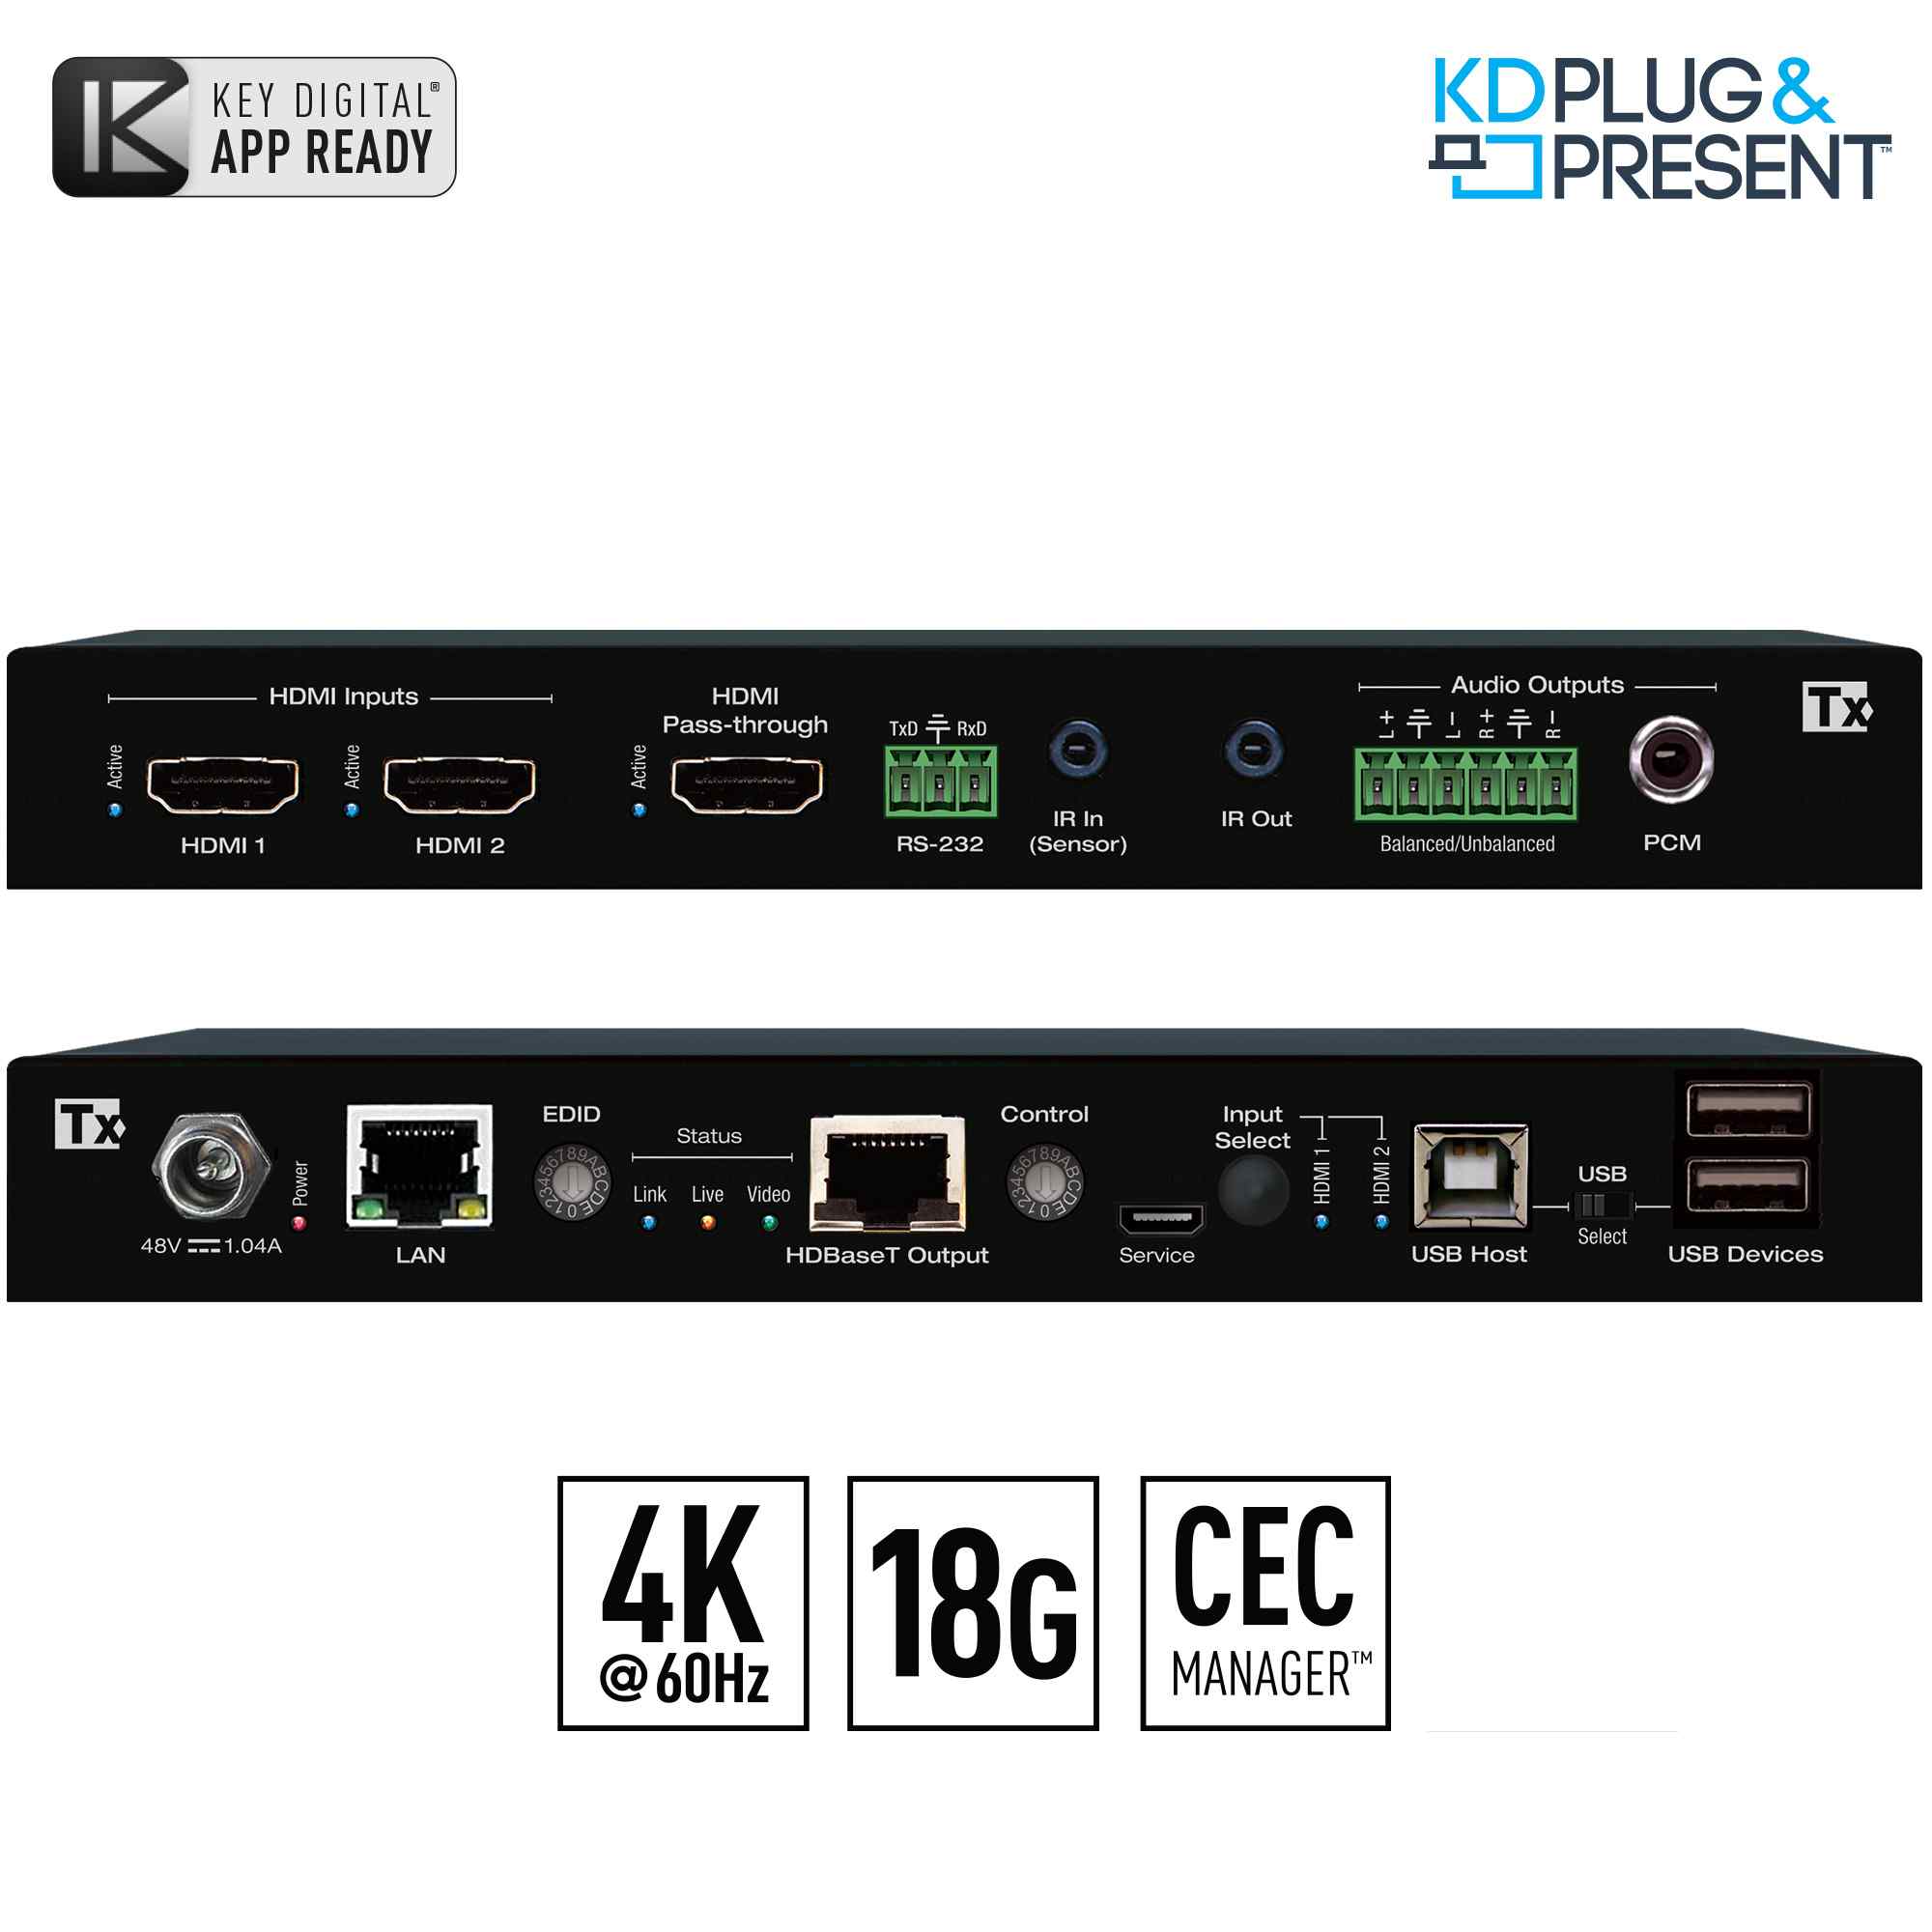 Thumbnail of Key Digital HDMI Switcher front and rear view